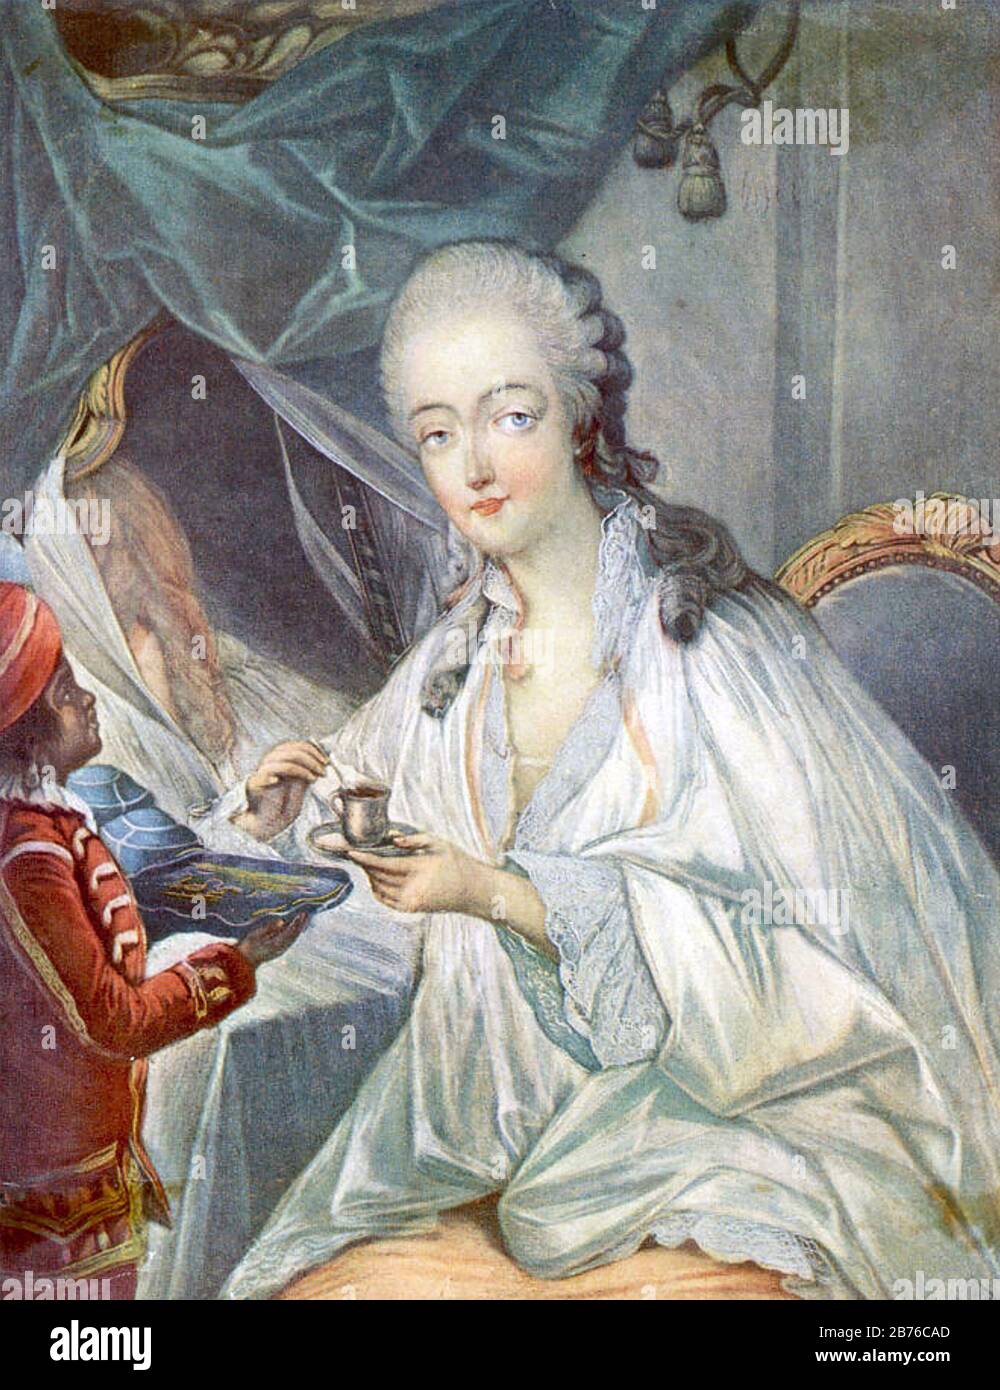 MADAME du BARRY (1743-1793) Mistress of Louis XV of France Stock Photo